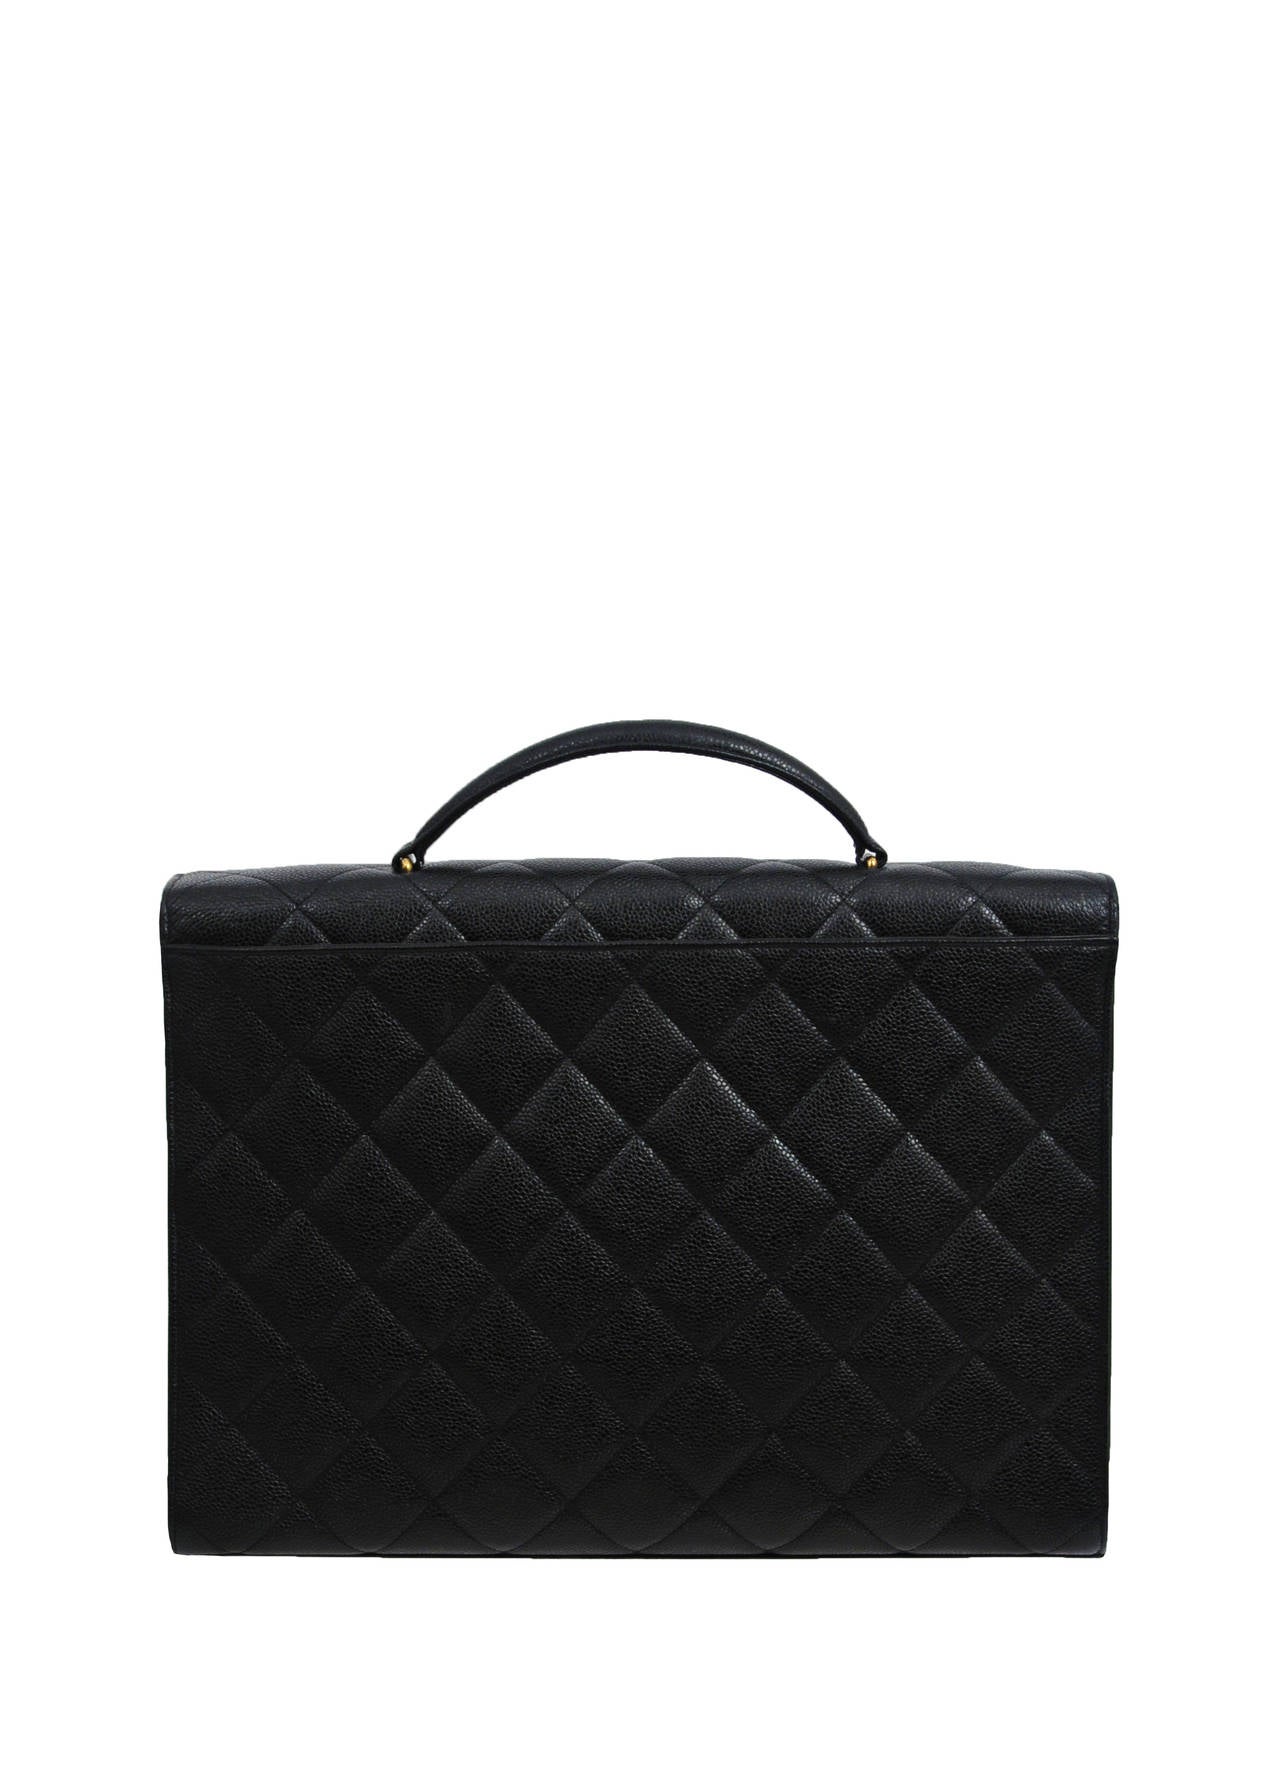 Vintage Chanel black caviar leather laptop bag. Comes with hologram sticker. All of our vintage designer luxury bags are guaranteed to be 100% authentic and original.